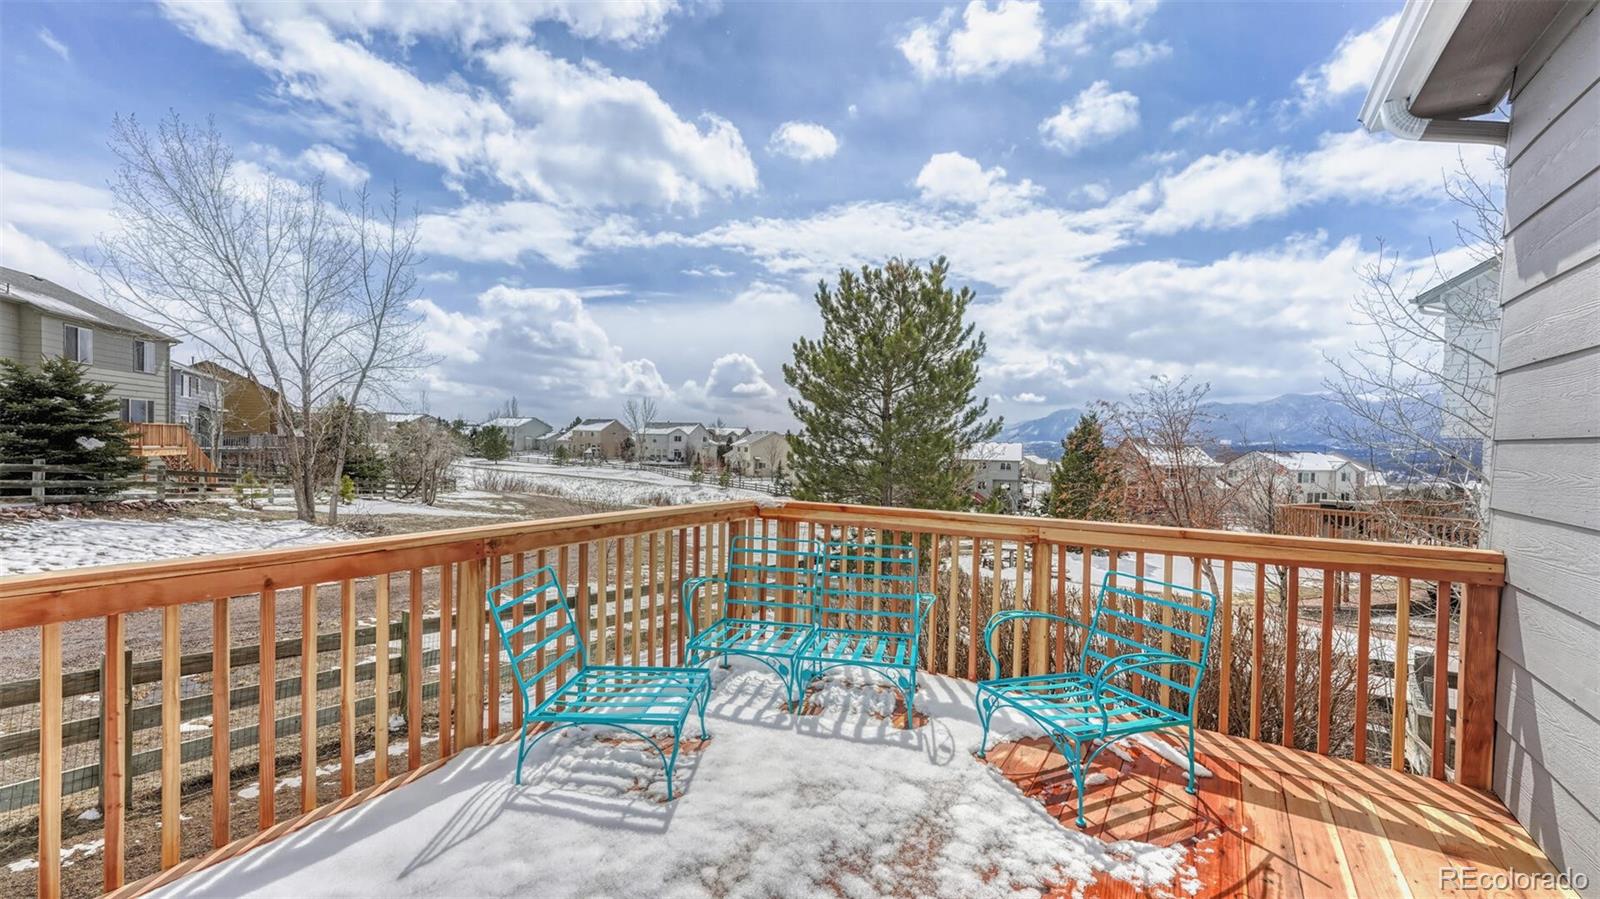 566 Oxbow, Monument, CO